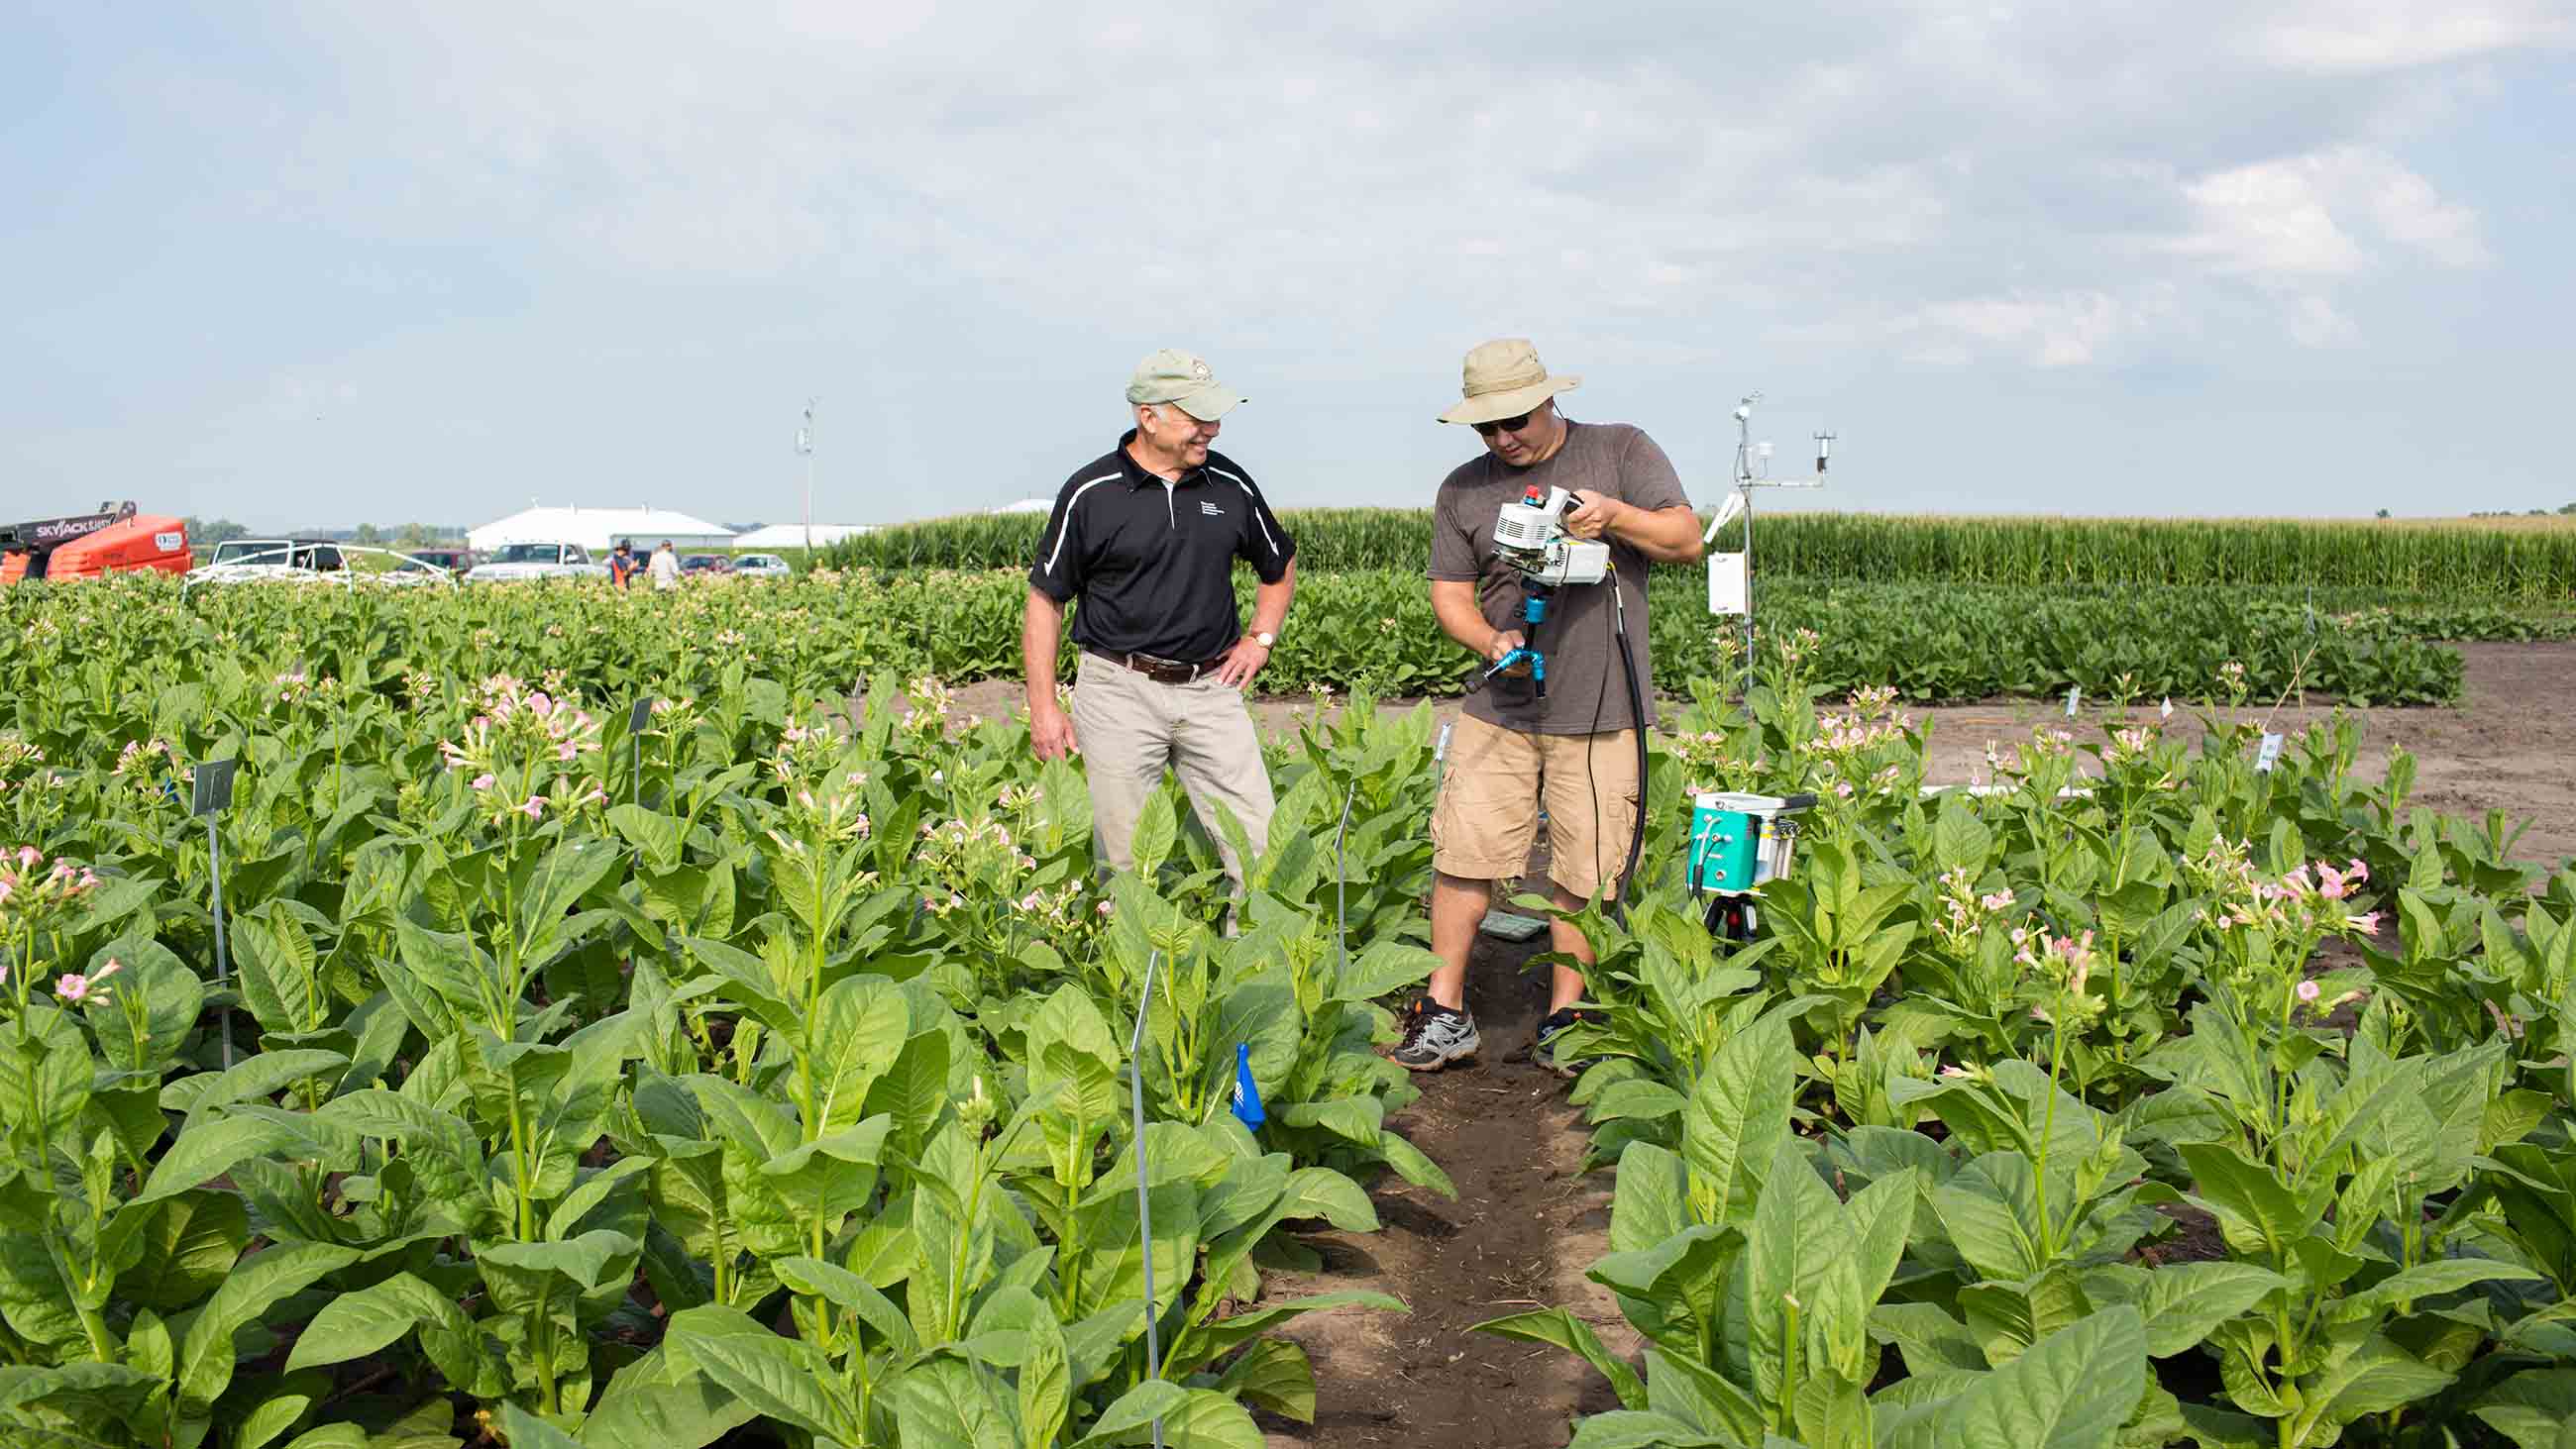 Don Ort and Paul South stand in tobacco field trial.